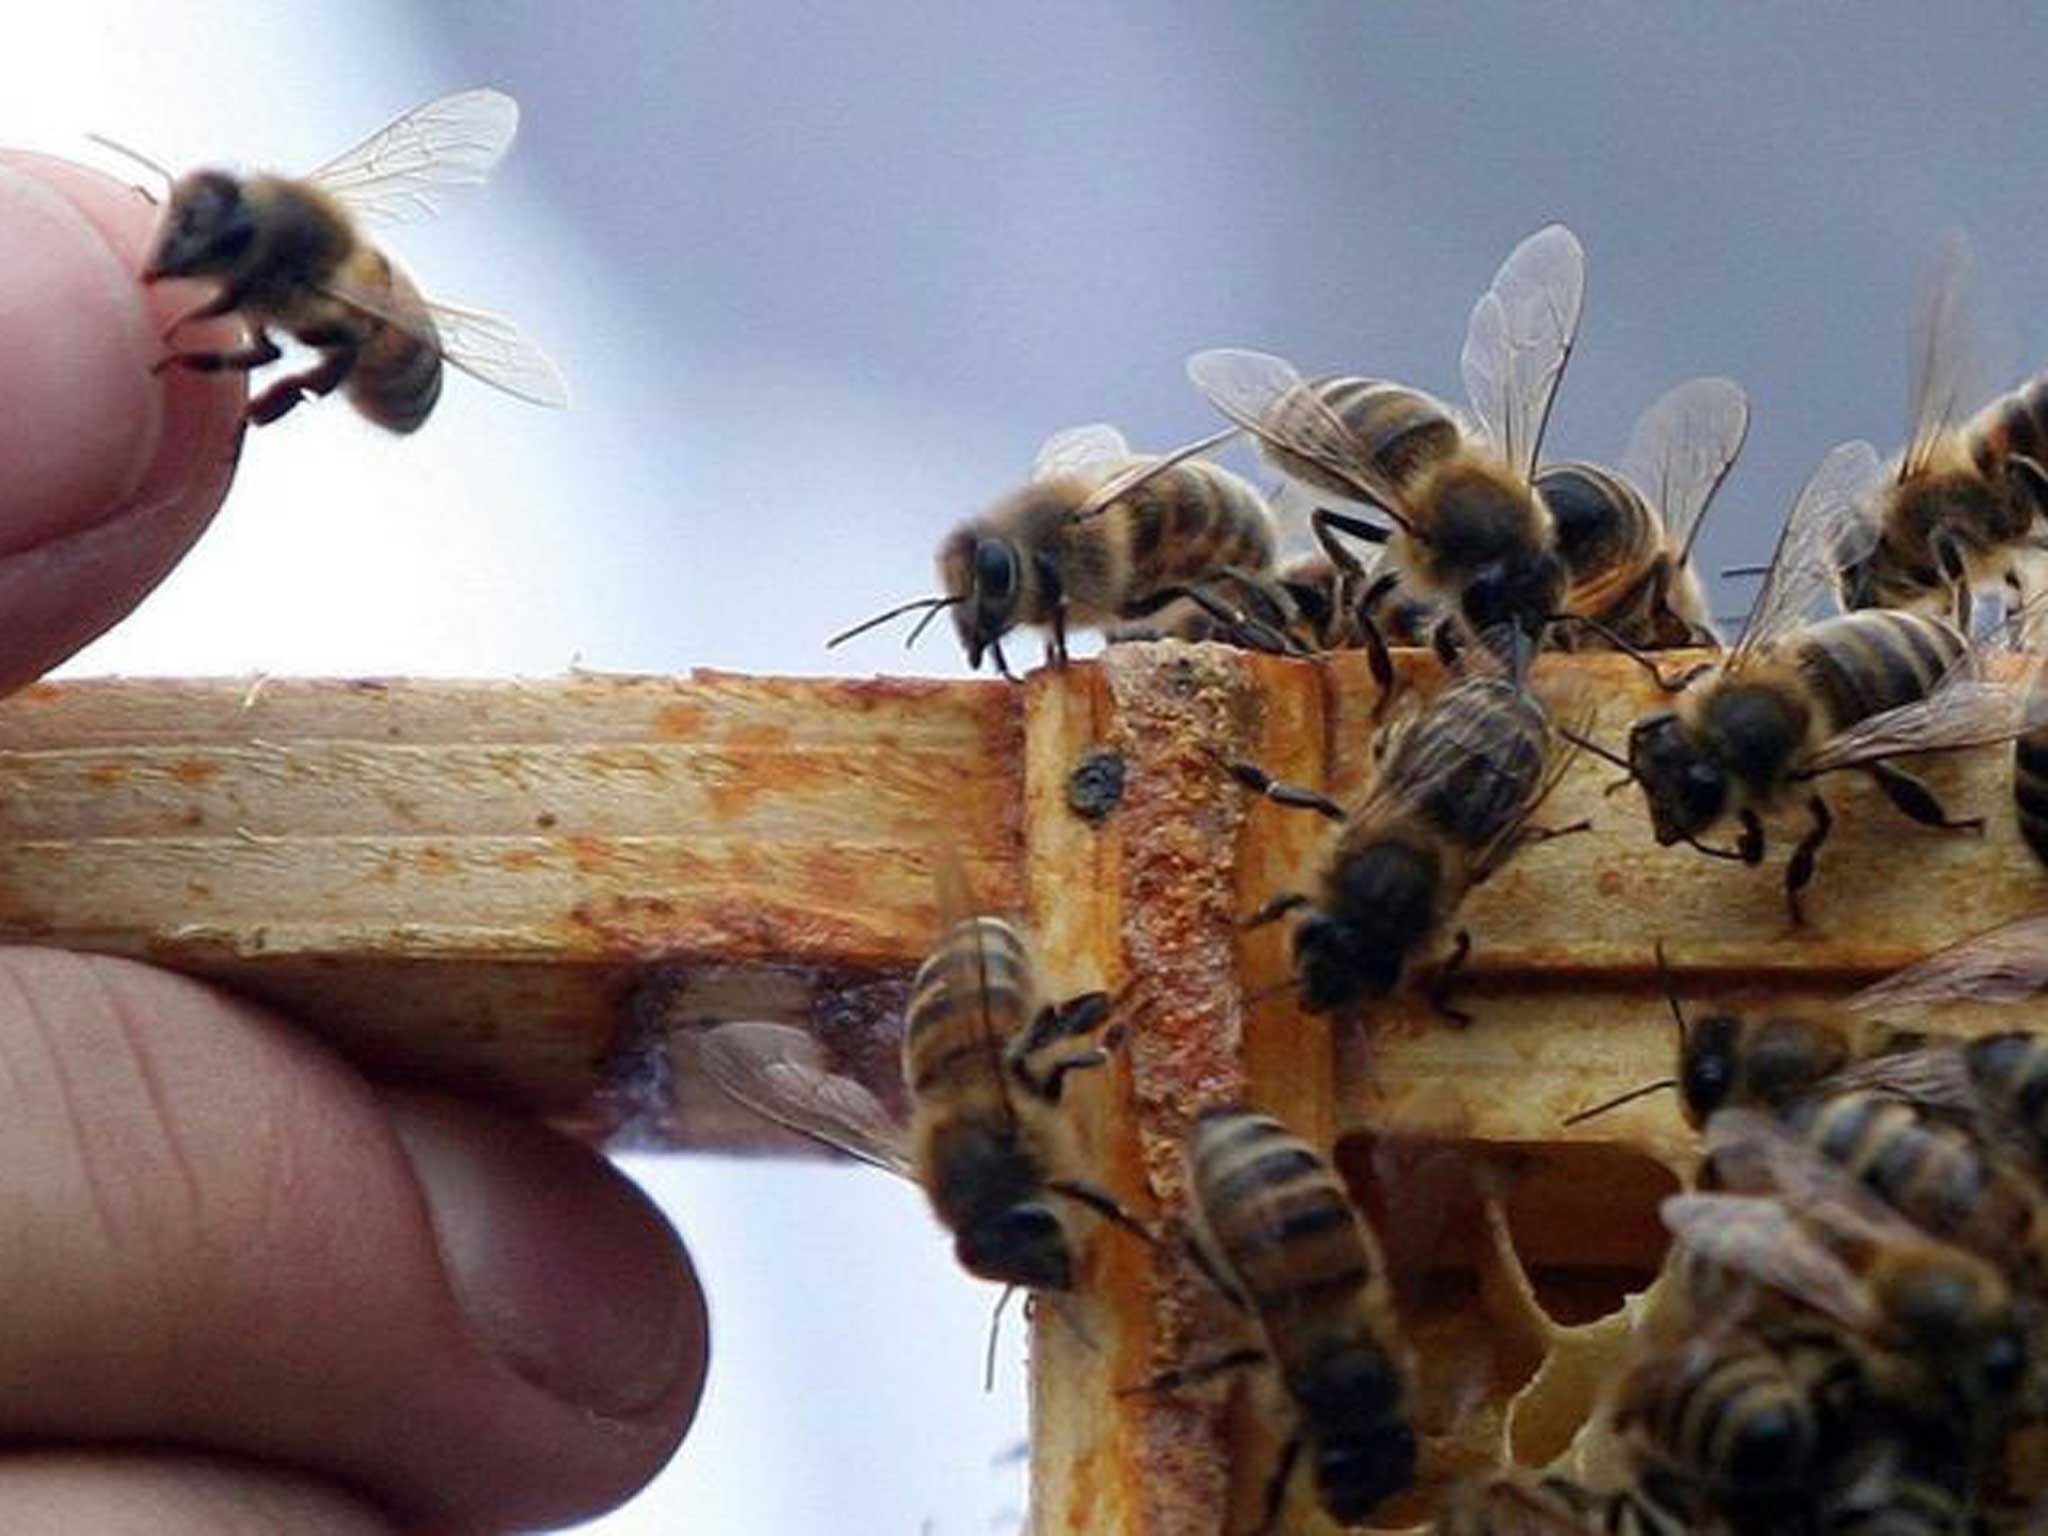 A new study covering 17 EU countries says that far more honeybees are dying in the UK and other parts of northern Europe than in Mediterranean countries